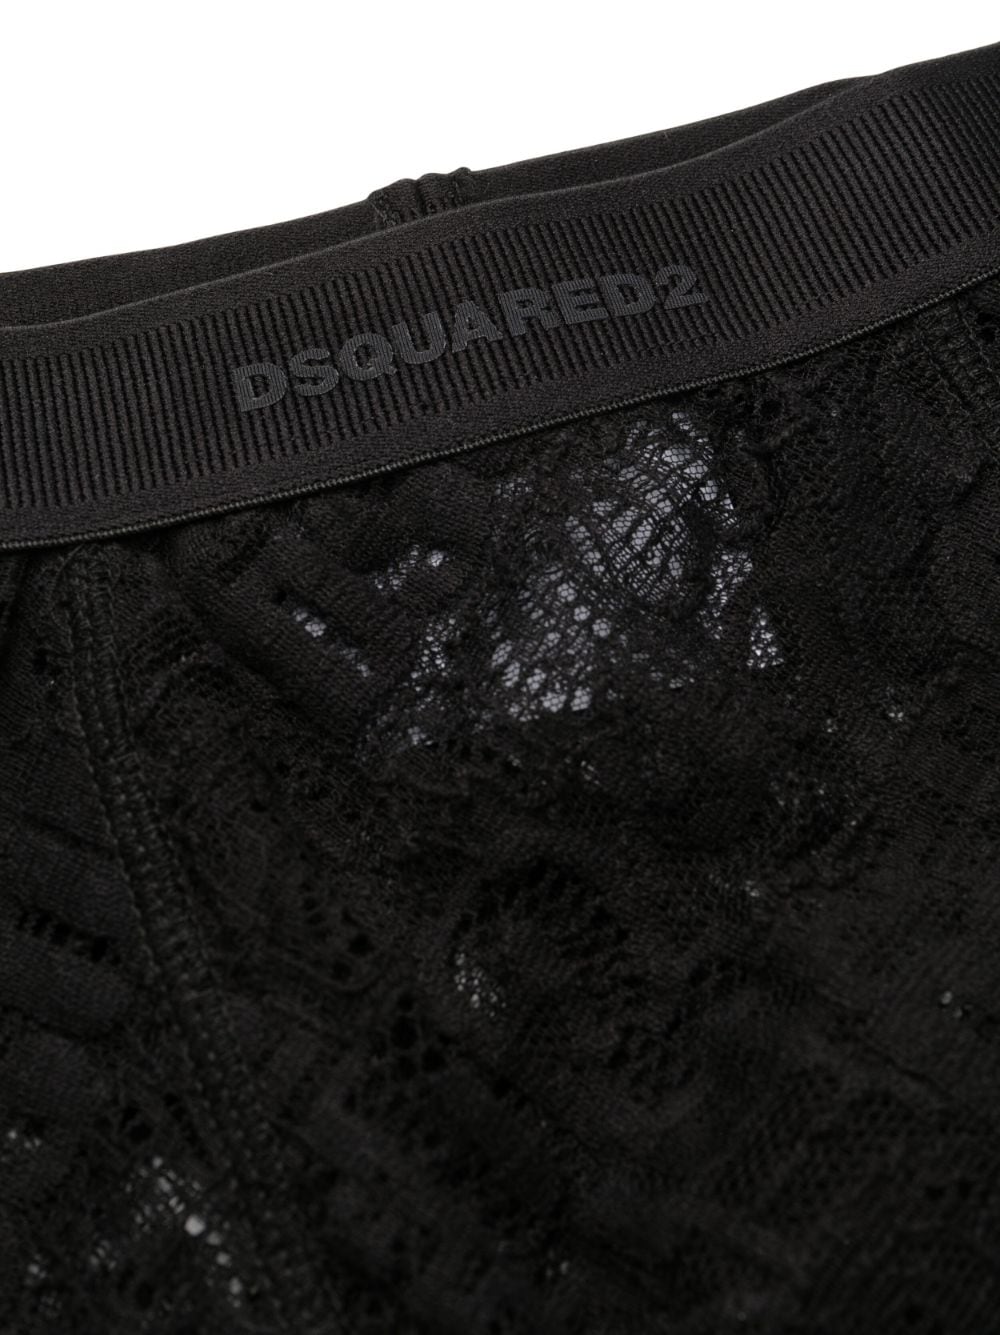 Dsquared2 logo-print lace-overlay Boxers - Farfetch